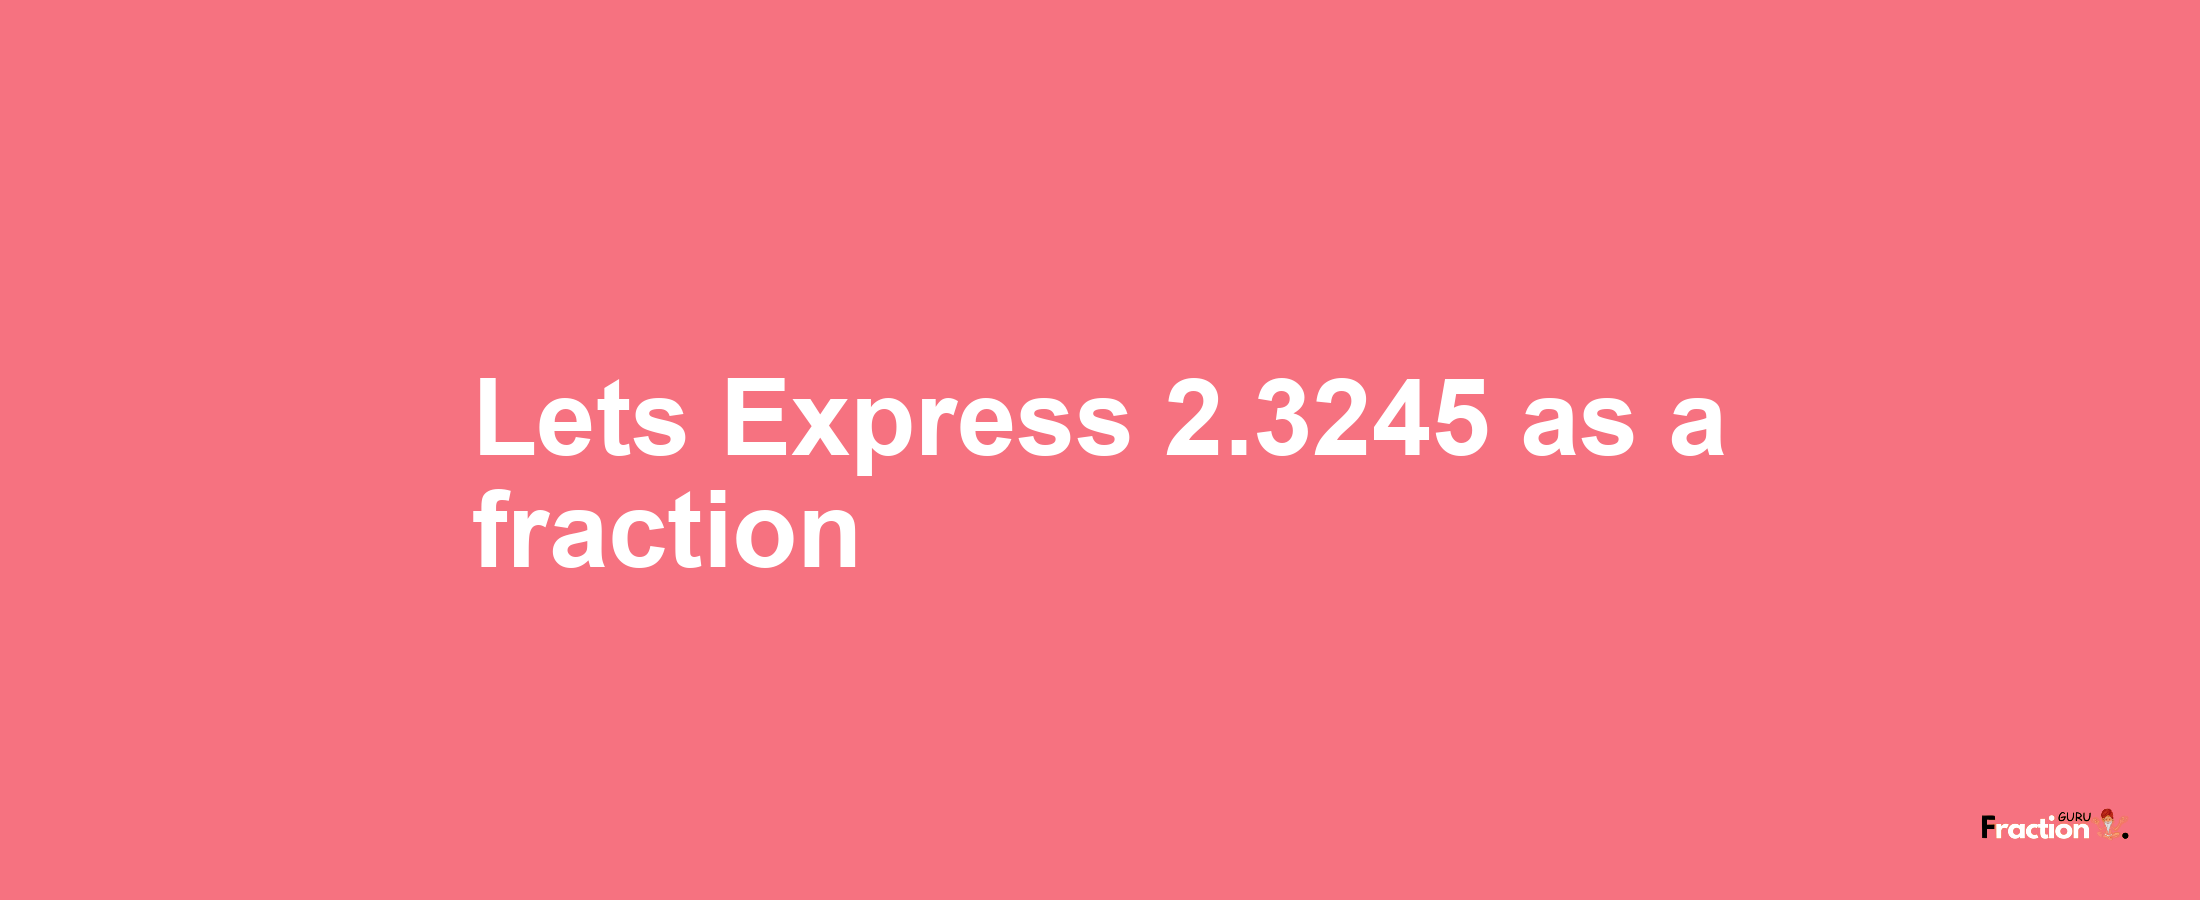 Lets Express 2.3245 as afraction